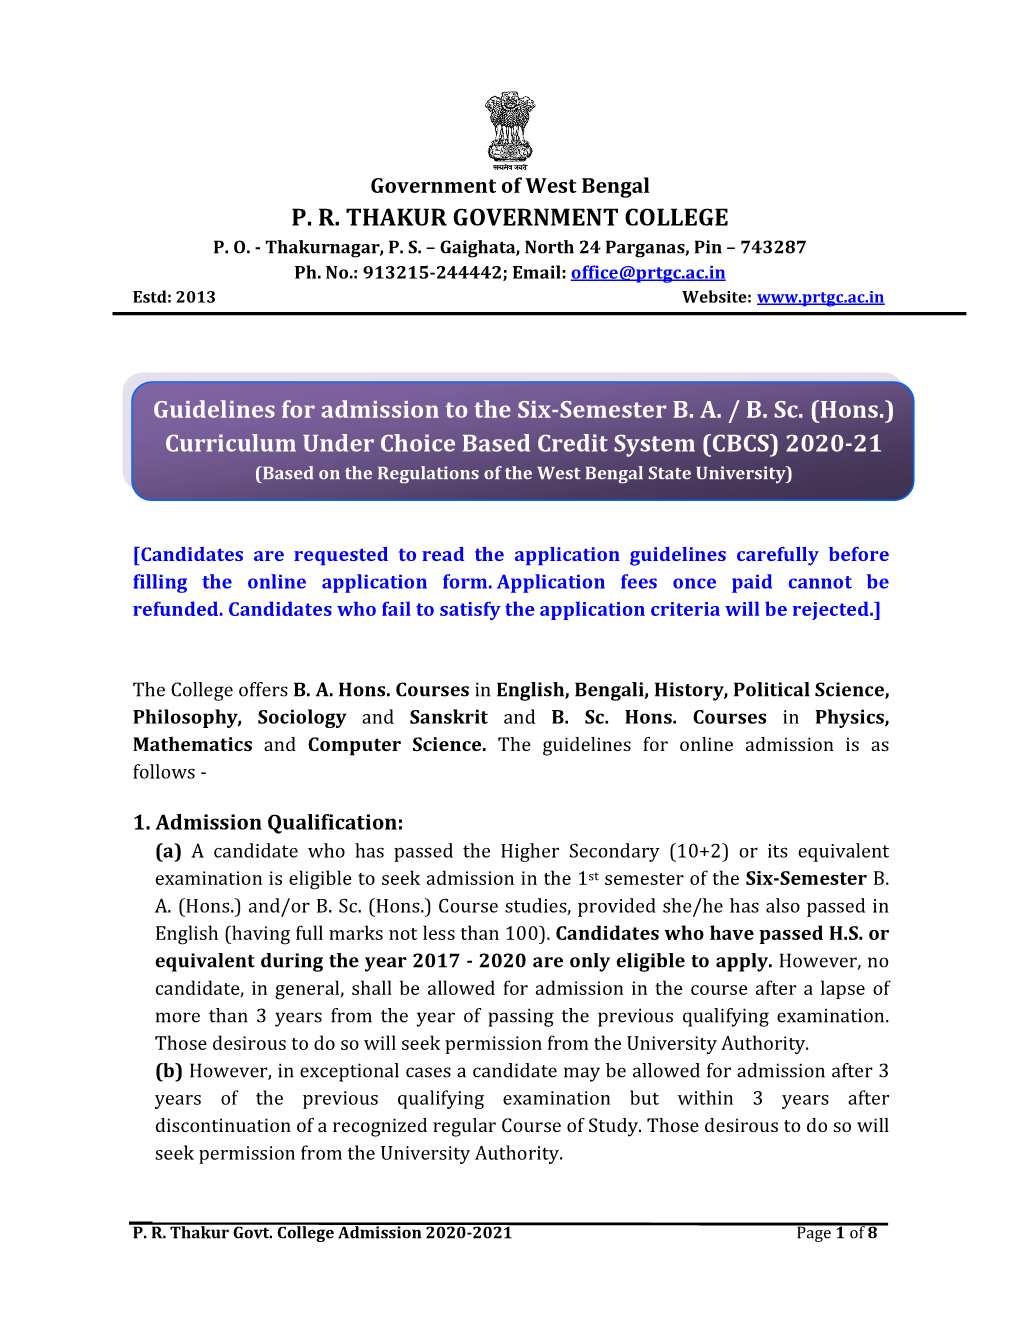 P. R. THAKUR GOVERNMENT COLLEGE Guidelines for Admission